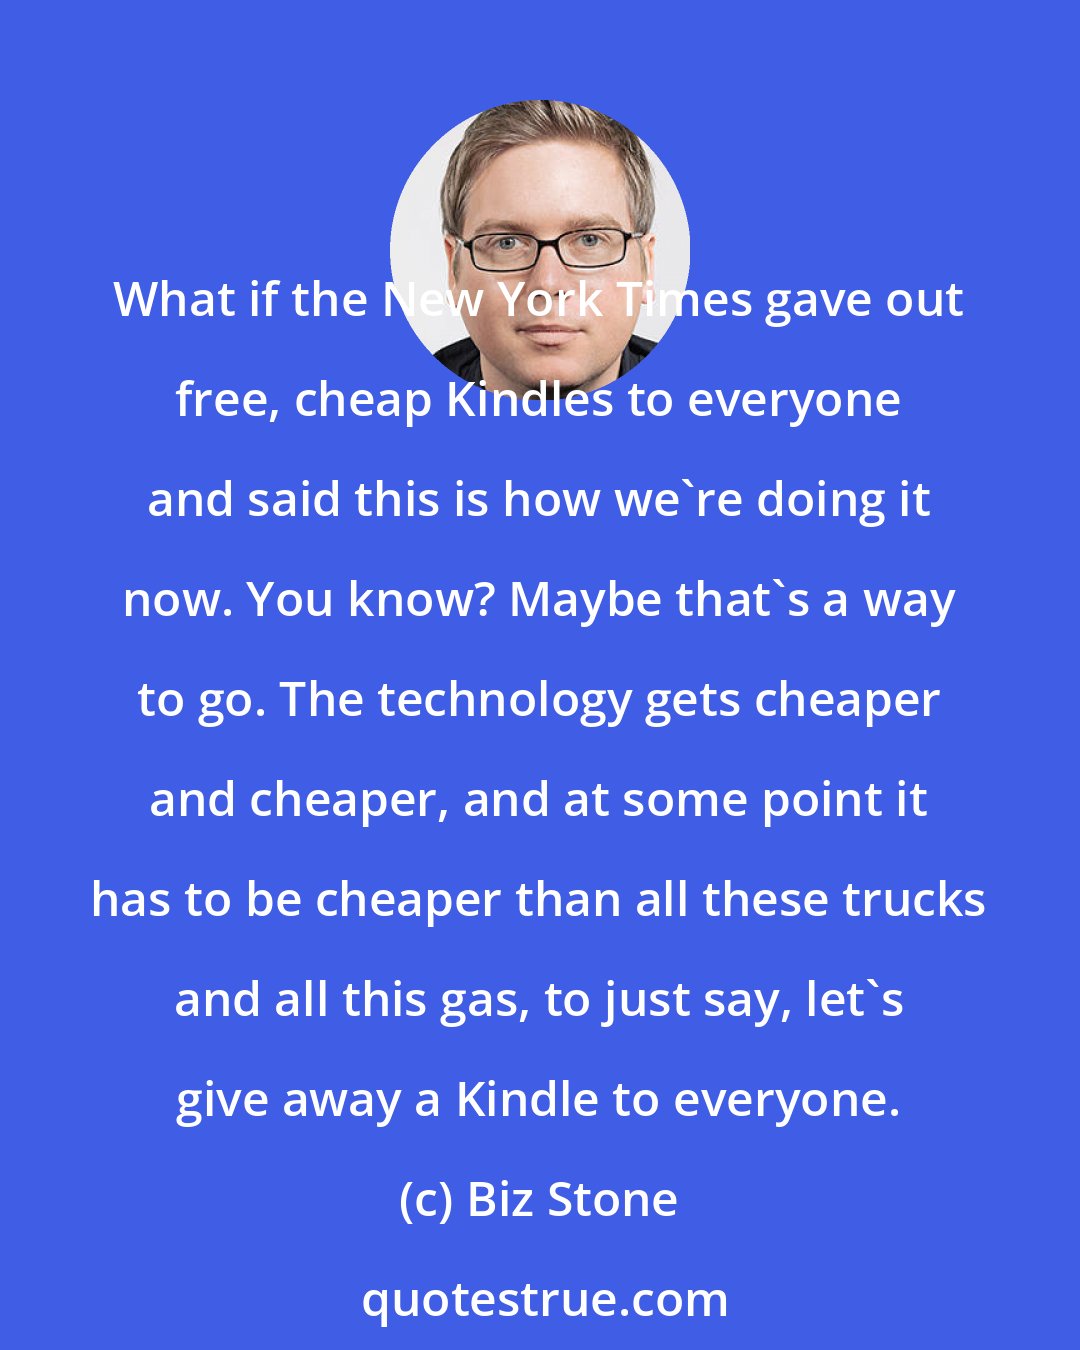 Biz Stone: What if the New York Times gave out free, cheap Kindles to everyone and said this is how we're doing it now. You know? Maybe that's a way to go. The technology gets cheaper and cheaper, and at some point it has to be cheaper than all these trucks and all this gas, to just say, let's give away a Kindle to everyone.